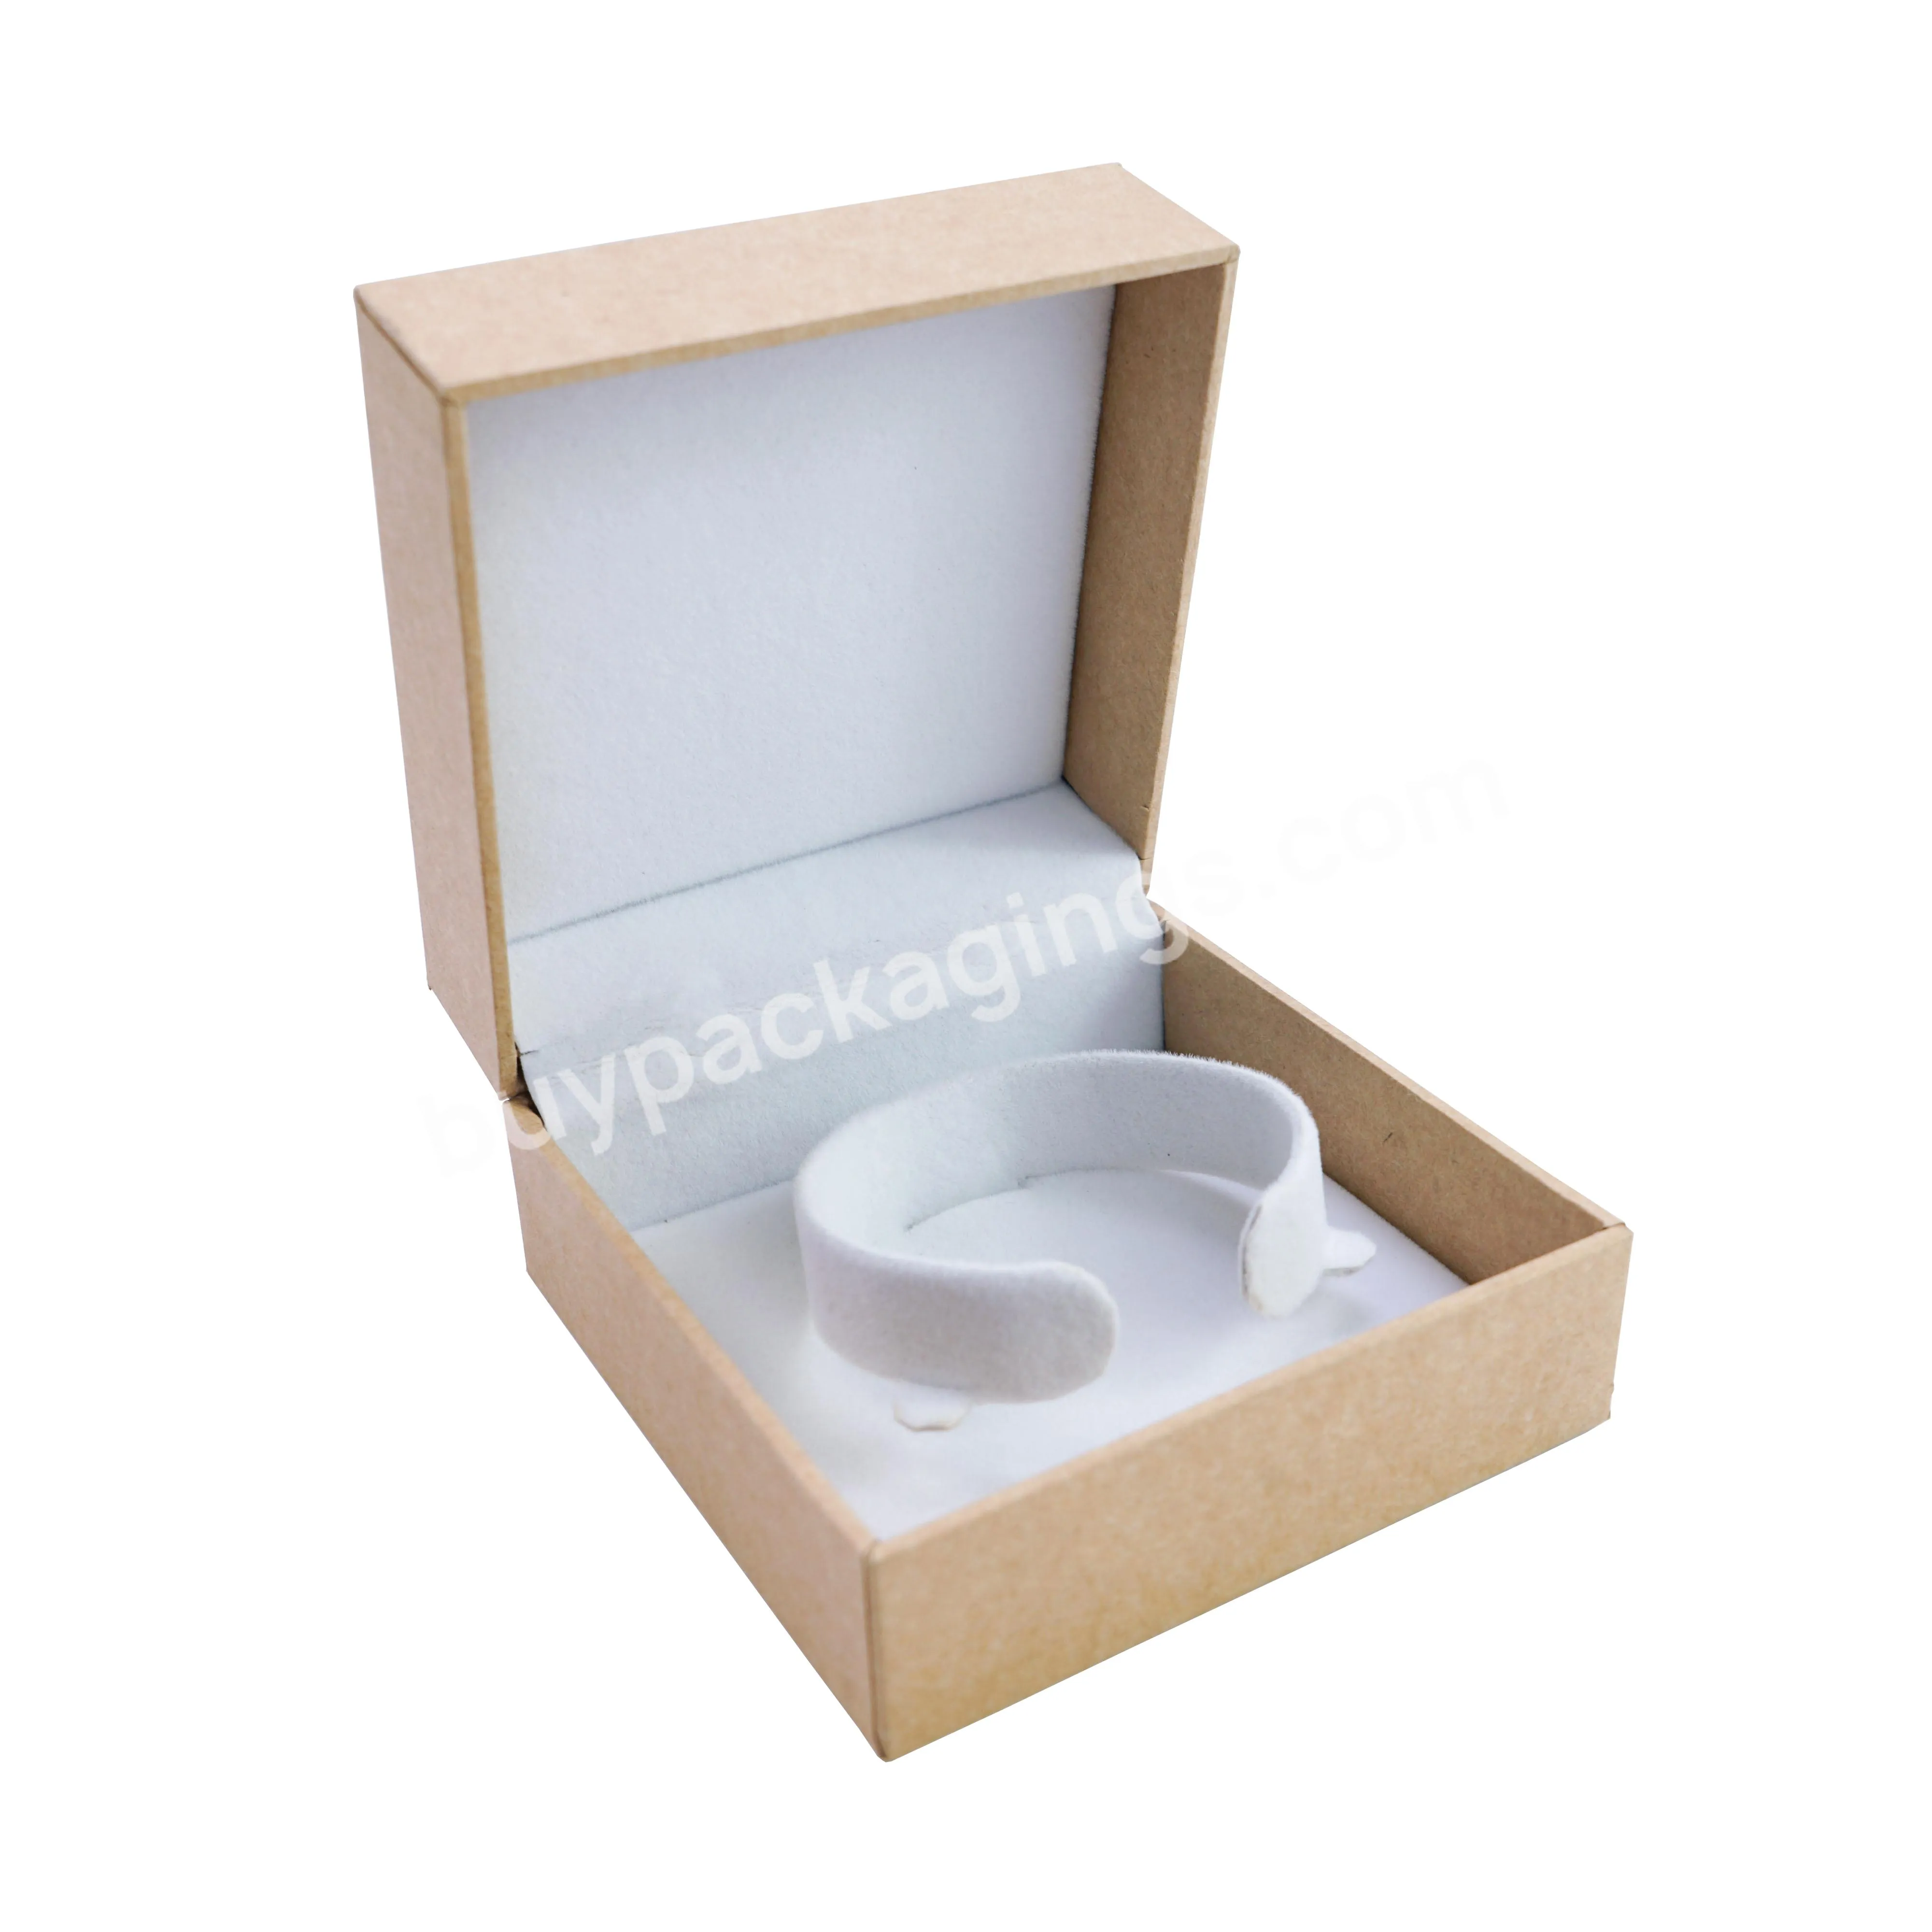 Custom Biodegradable Packaging Reasonable Price Clamshell Presentation Boxes For Jewelry Packaging - Buy Clamshell Shape Jewelry Packaging,Reasonable Price Packaging Boxes For Jewelry Boxes,Custom Biodegradable Packaging Reasonable Price Clamshell Pr